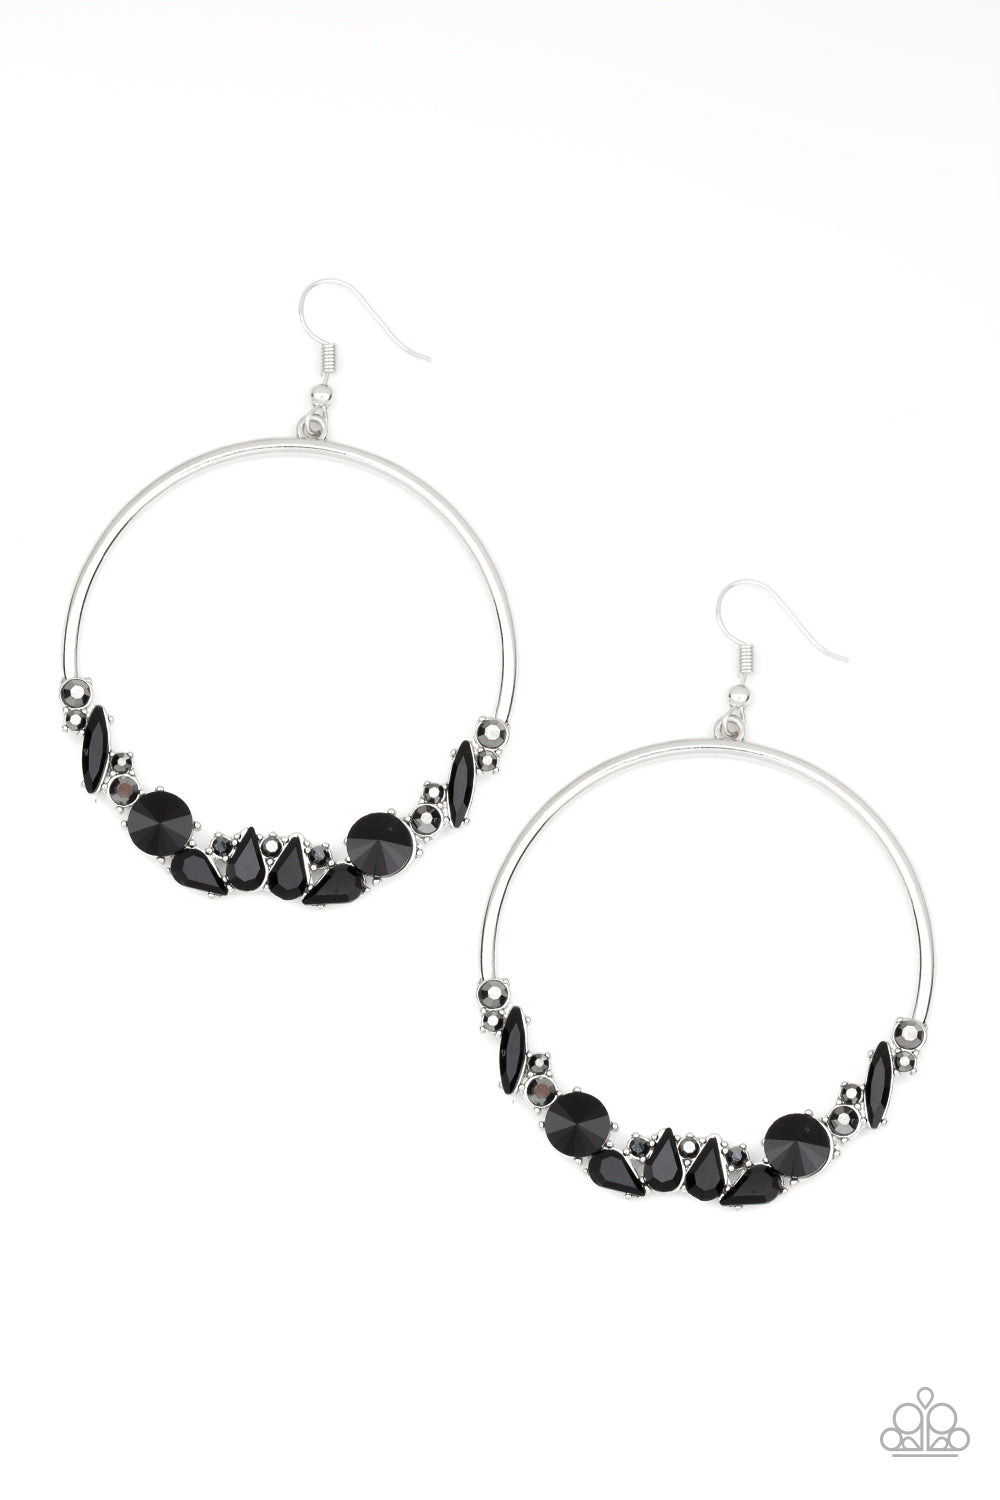 Business Casual Black Earring - Paparazzi Accessories  Vary in size and shape, an edgy collection of black and hematite rhinestones are encrusted along the bottom of a silver hoop for a glamorous look. Earring attaches to a standard fishhook fitting.  All Paparazzi Accessories are lead free and nickel free!  Sold as one pair of earrings.